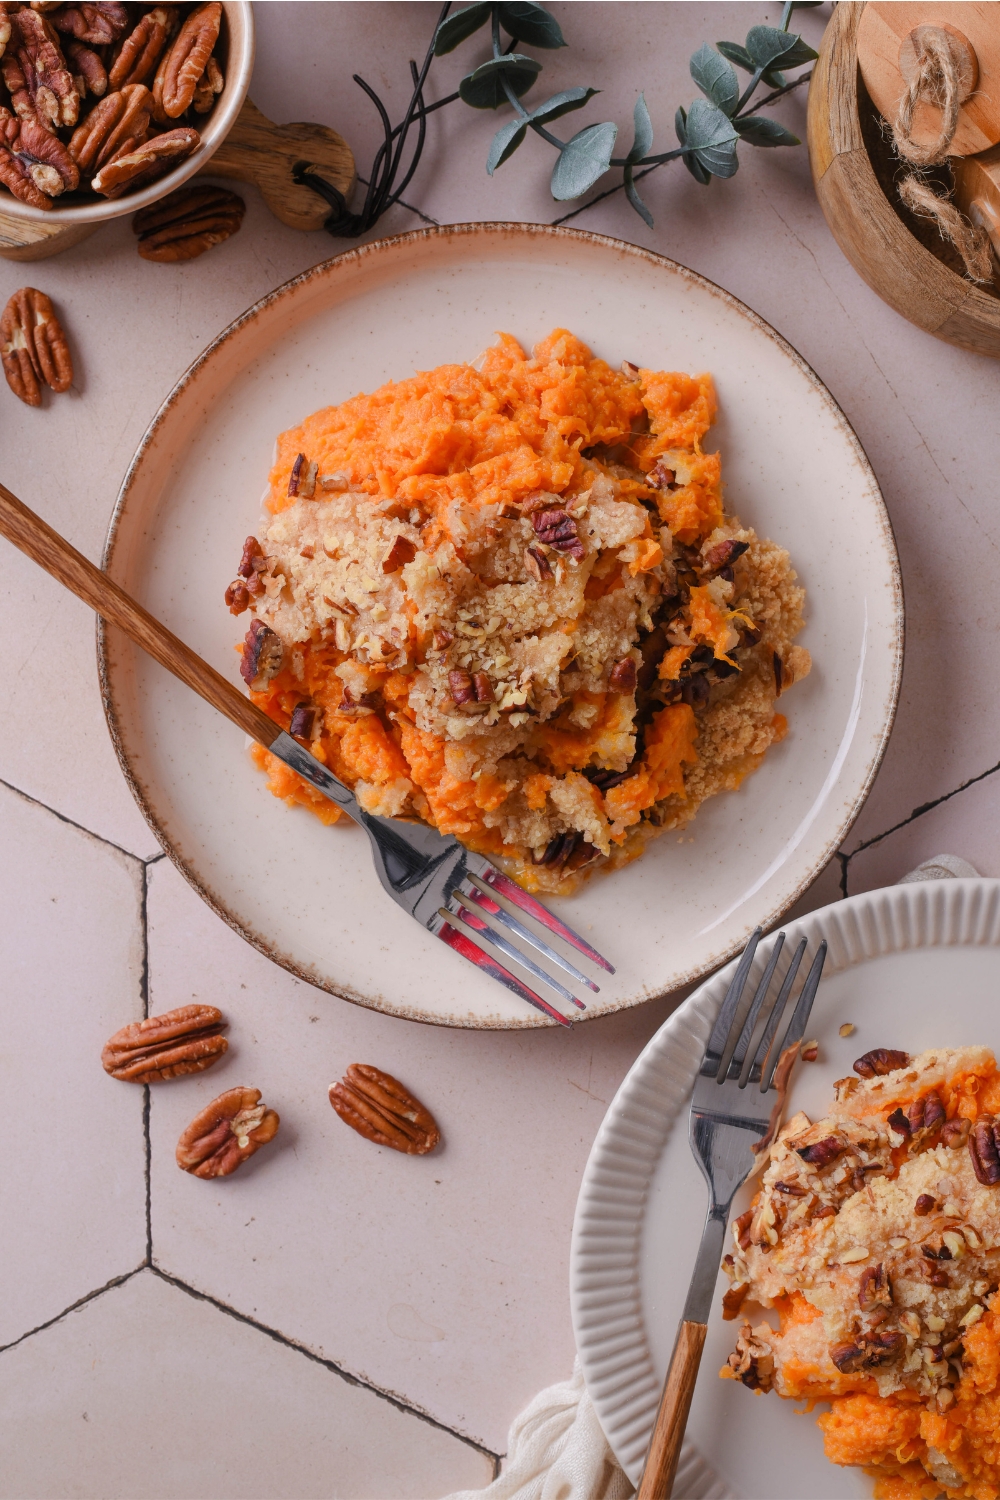 A plate with pumpkin casserole with crumbly pecan topping. A fork is next to it.